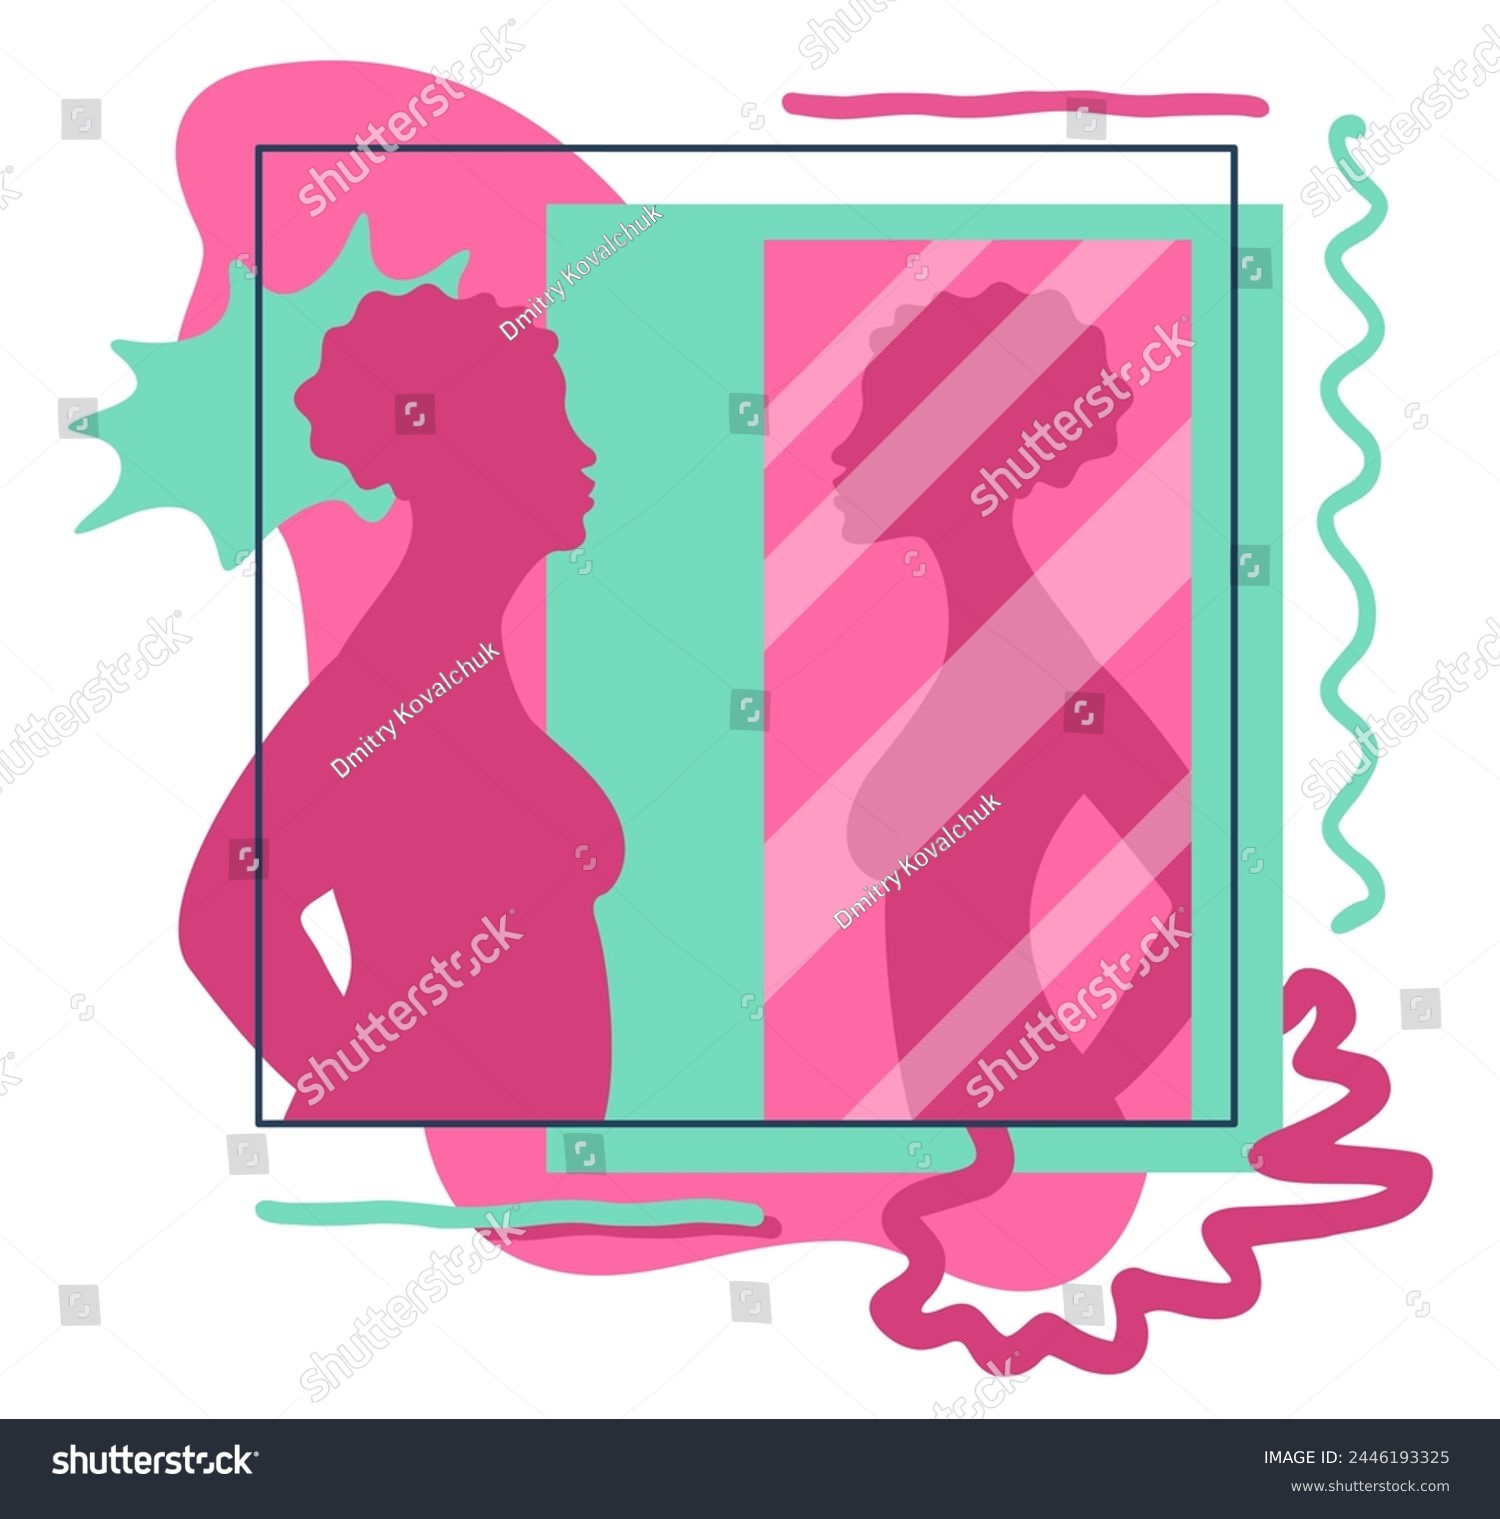 SVG of Wish to loss weight. Woman looking at mirror and see her reflection with slim figure. Abstract vector illustration svg